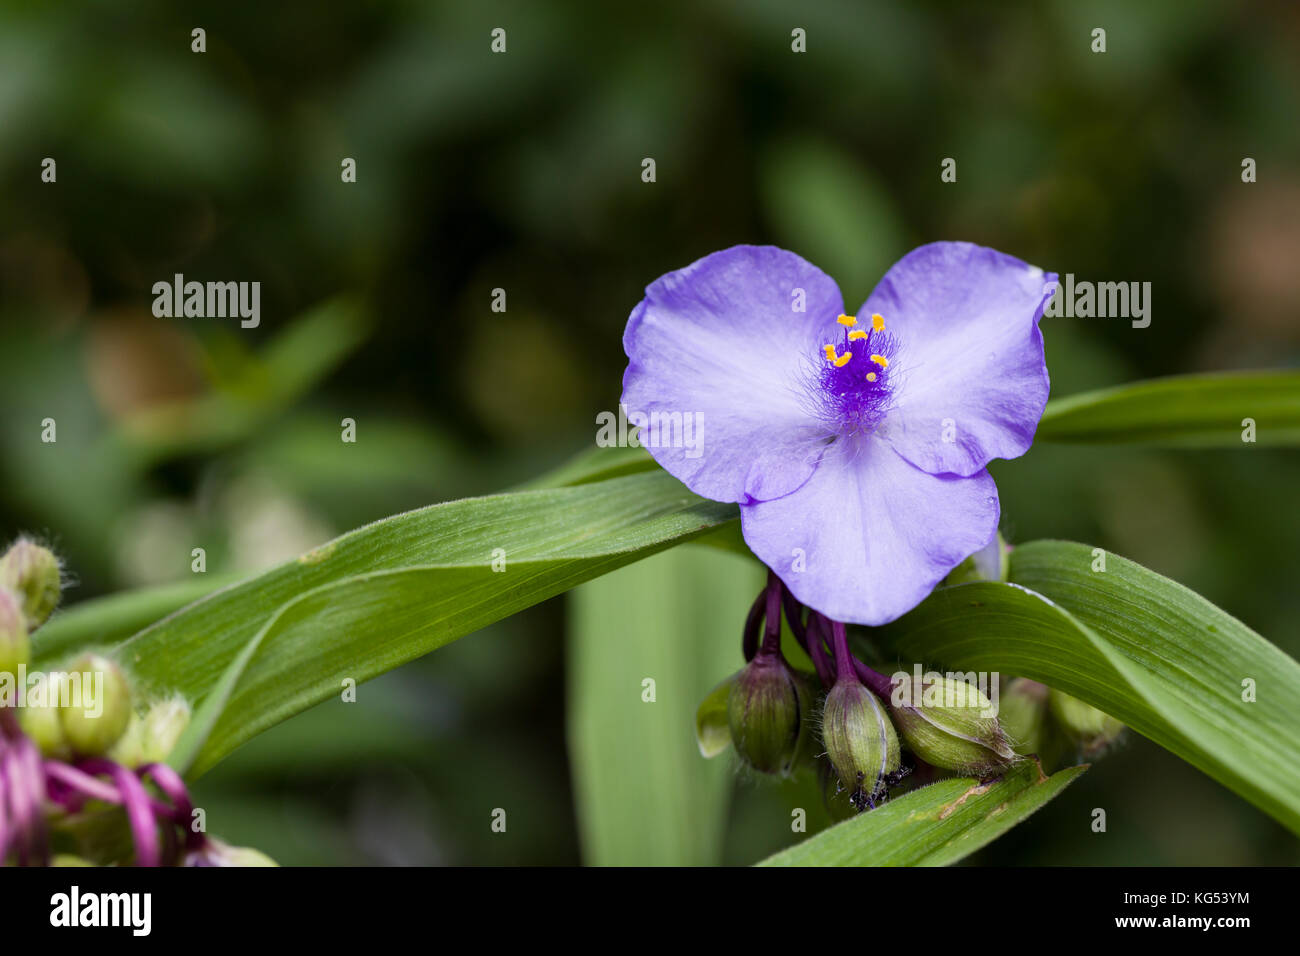 Closeup of blooming blue garden tradescantia spiderworts flower with natural green background. Shallow depth of field. Stock Photo